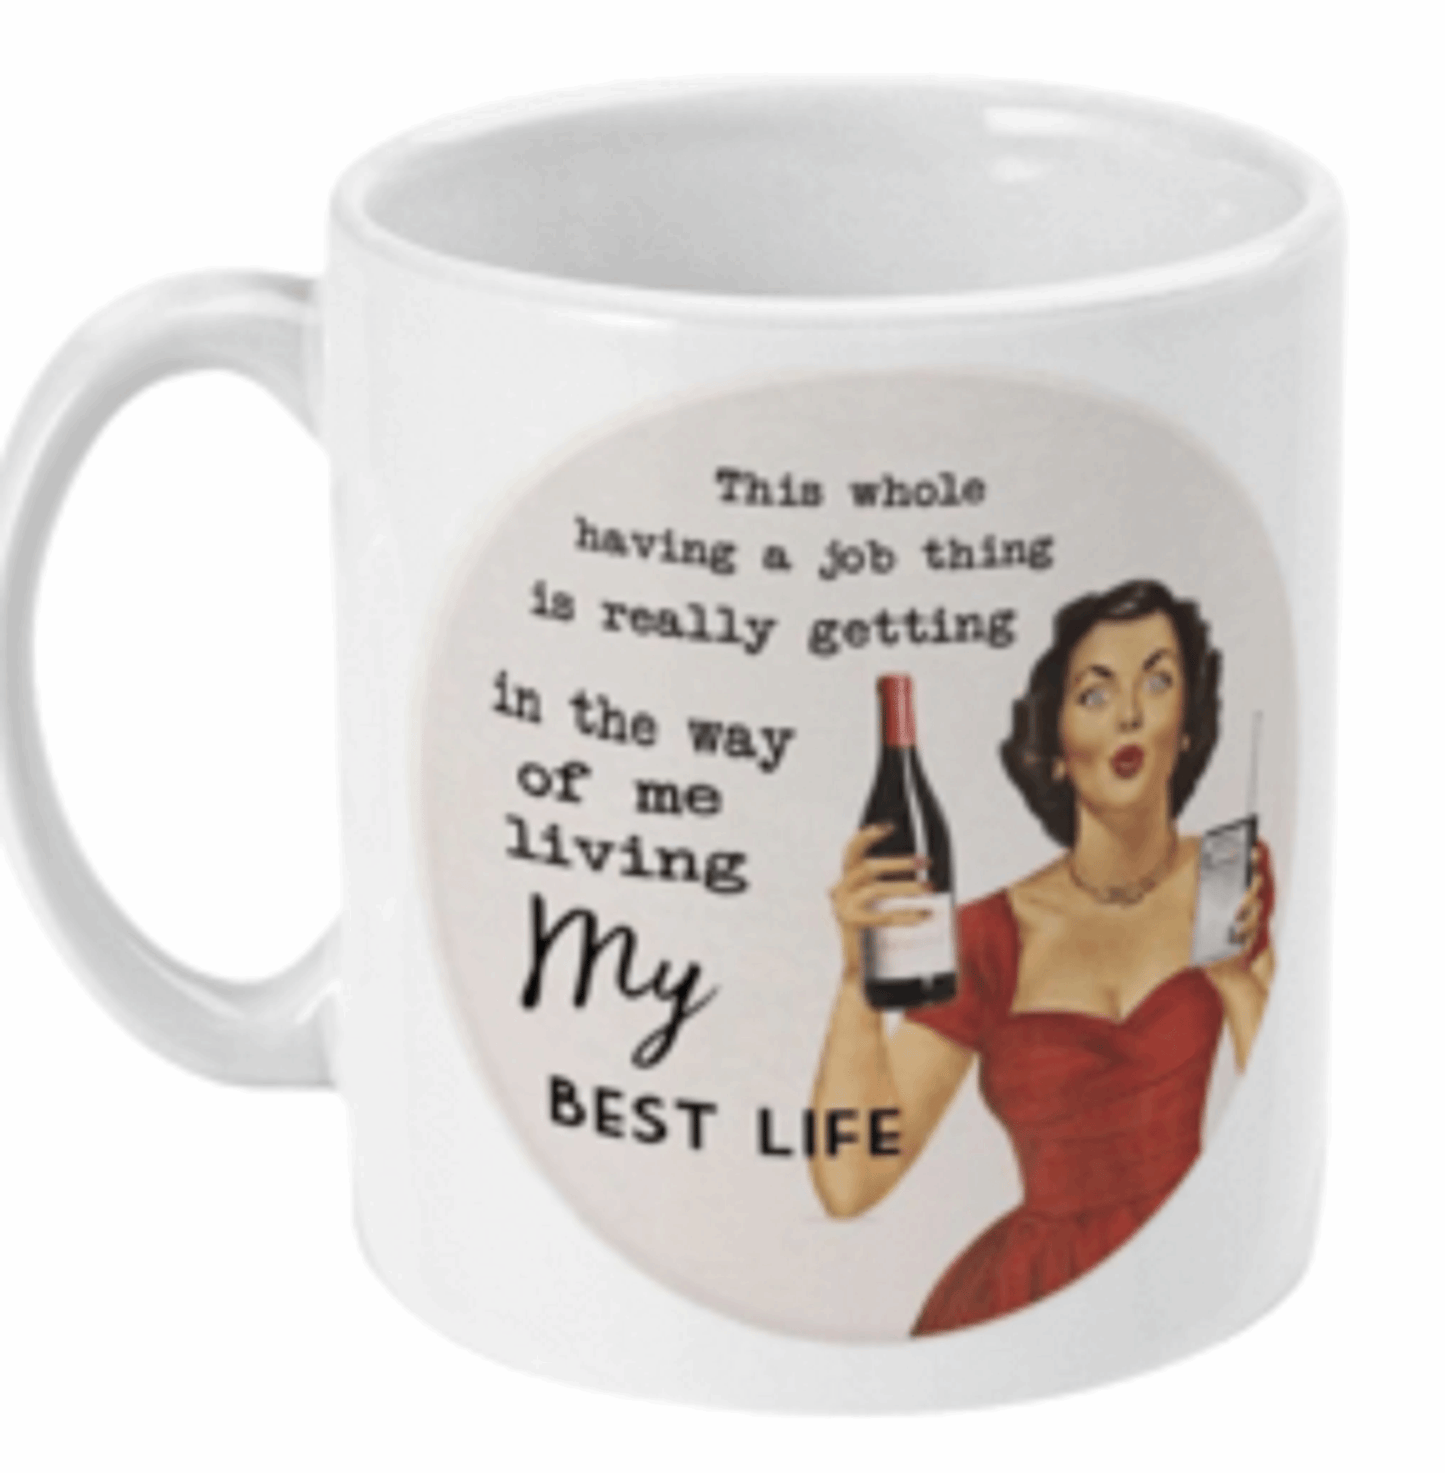  Funny My Job Gets In The Way Vintage Lady Mug by Free Spirit Accessories sold by Free Spirit Accessories